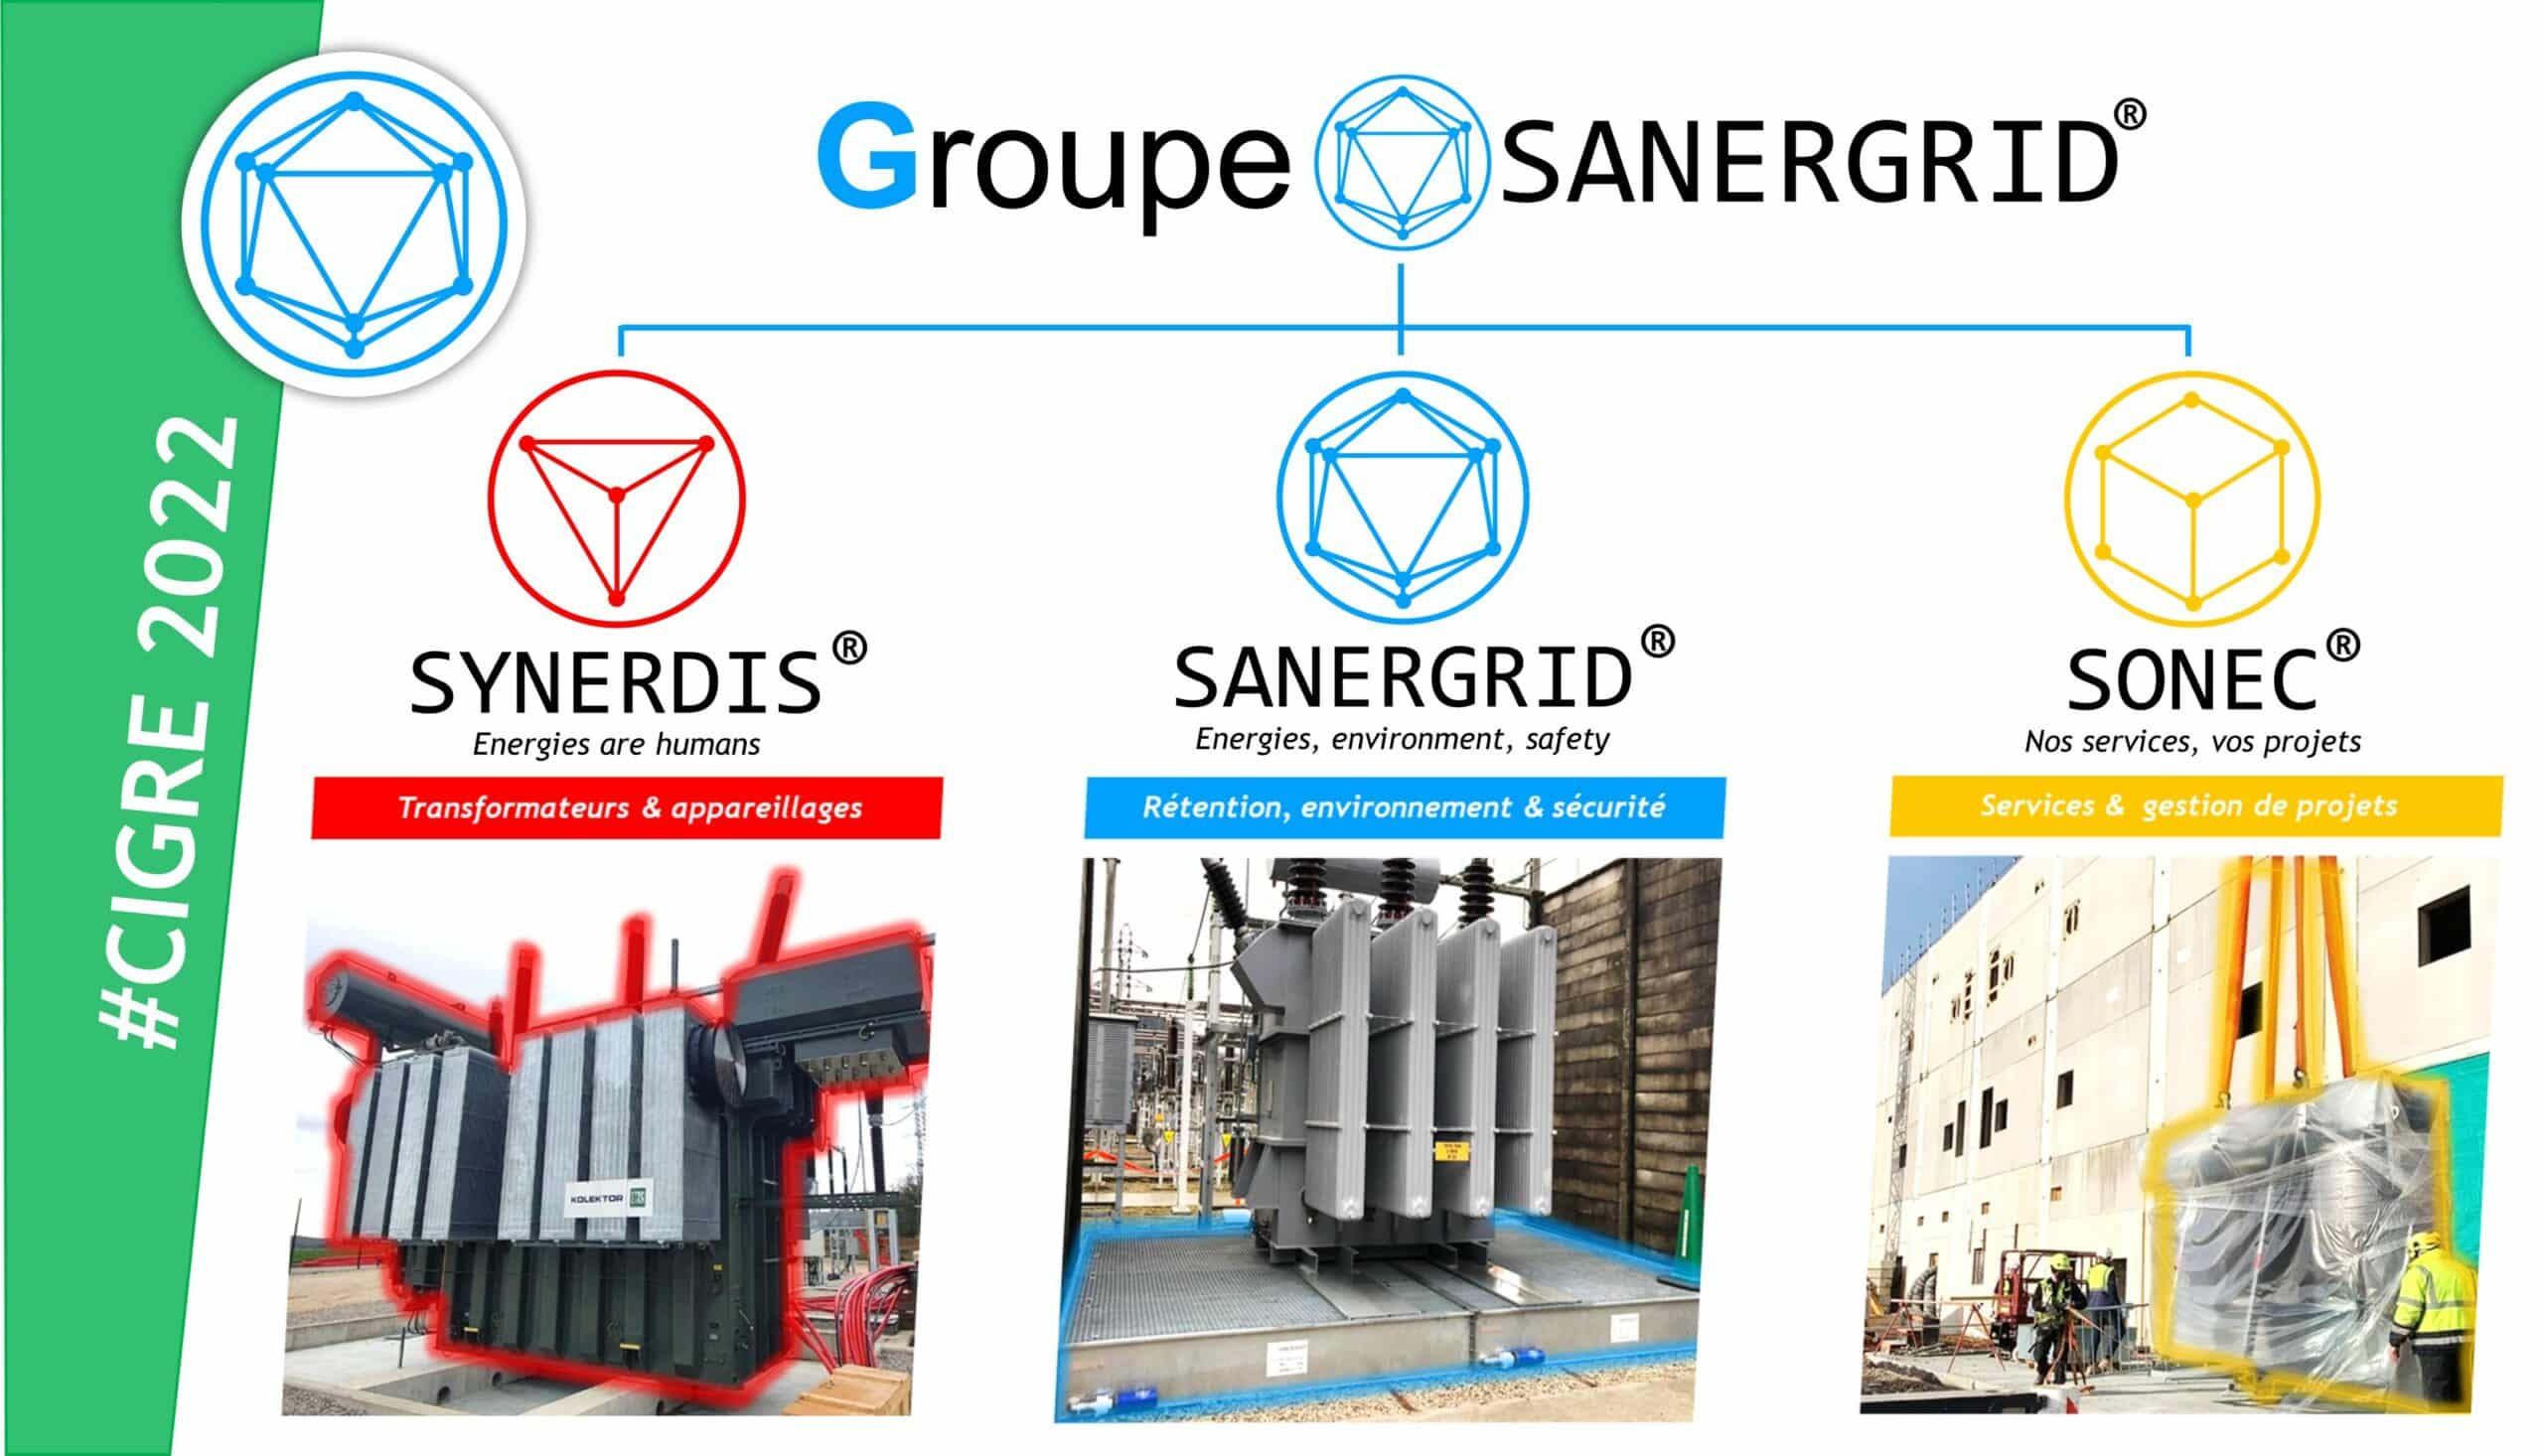 legal reorganisation of the SANERGRID Group with SONEC and SYNERDIS services and distribution of electrical equipment